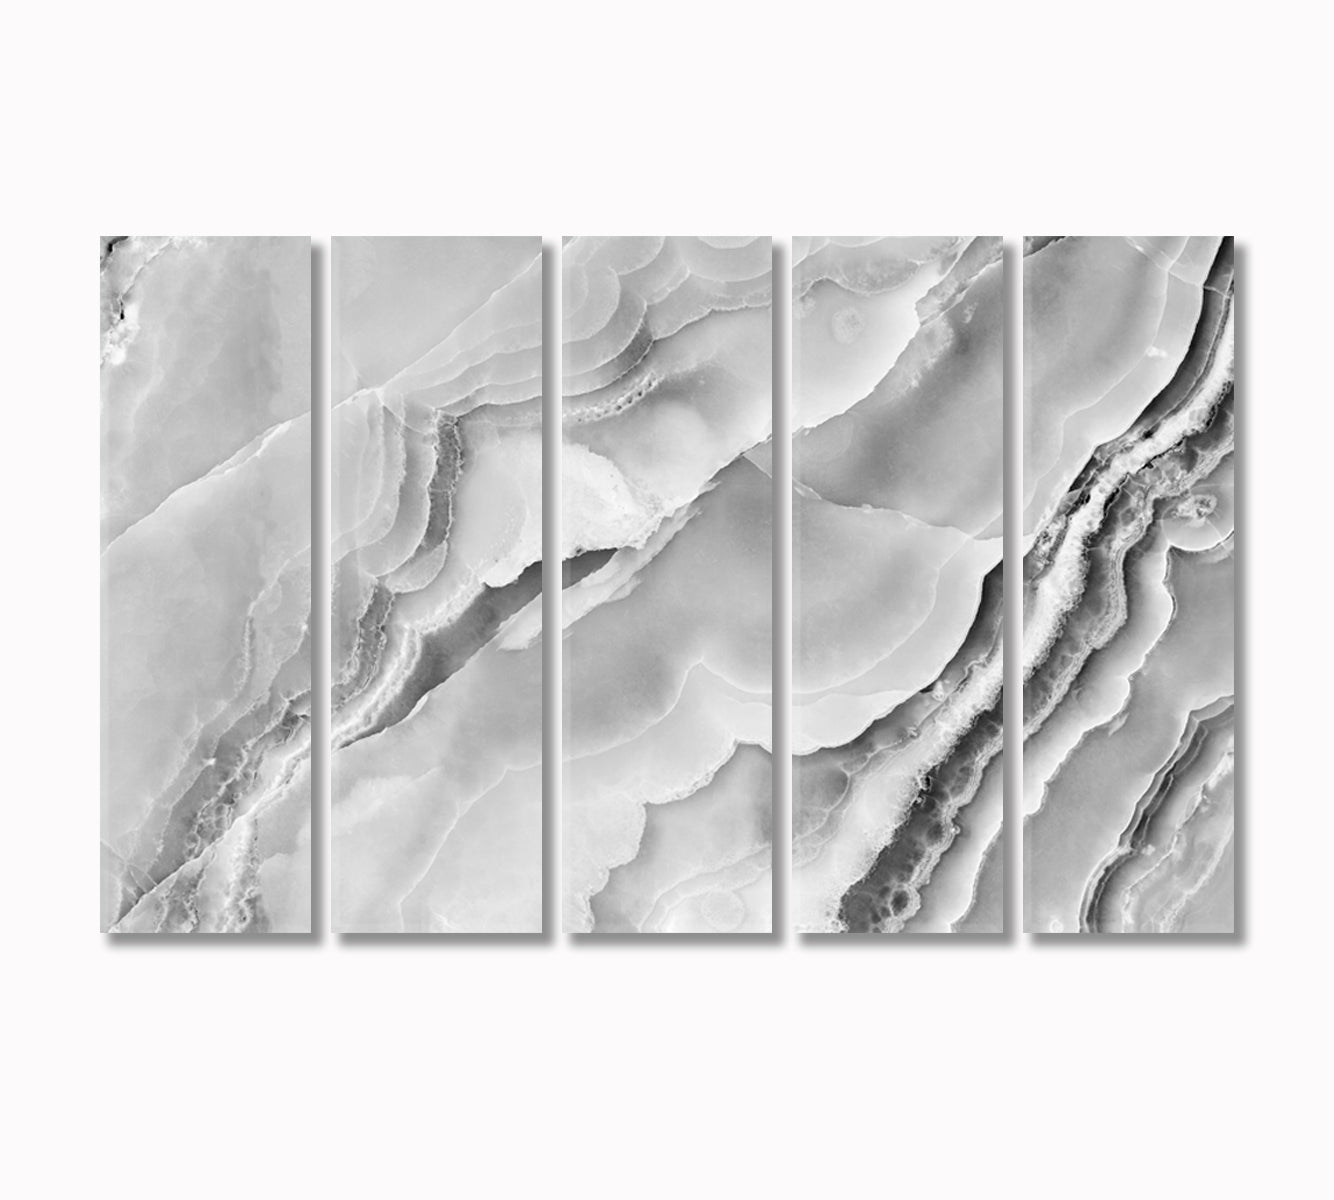 Natural White Marble Abstraction Canvas Print-Canvas Print-CetArt-5 Panels-36x24 inches-CetArt